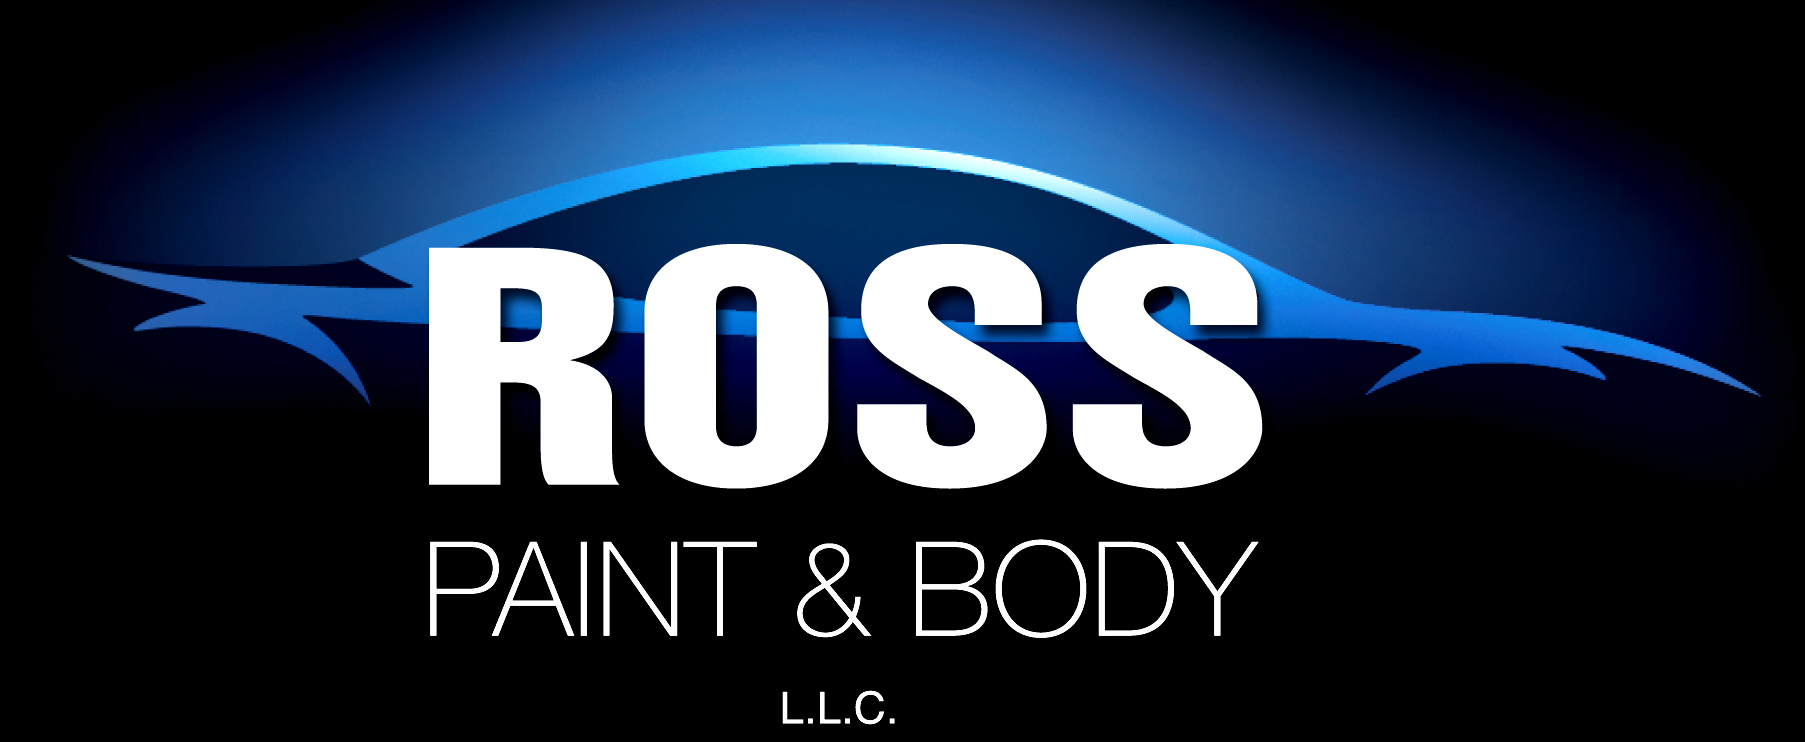 Ross Paint And Body, LLC